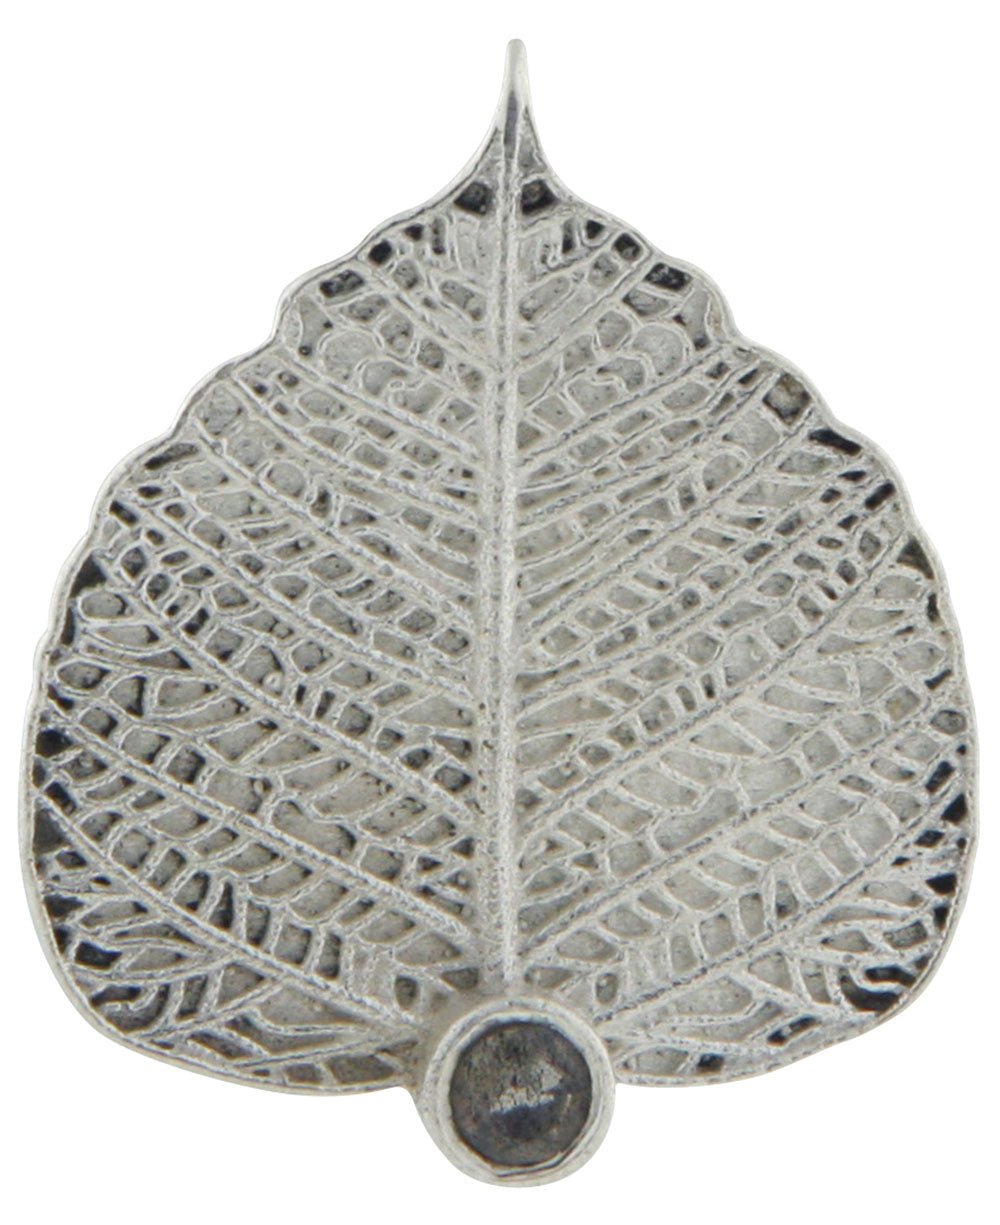 Textured Bodhi Leaf Pendant, Sterling Silver with Labradorite - Charms & Pendants